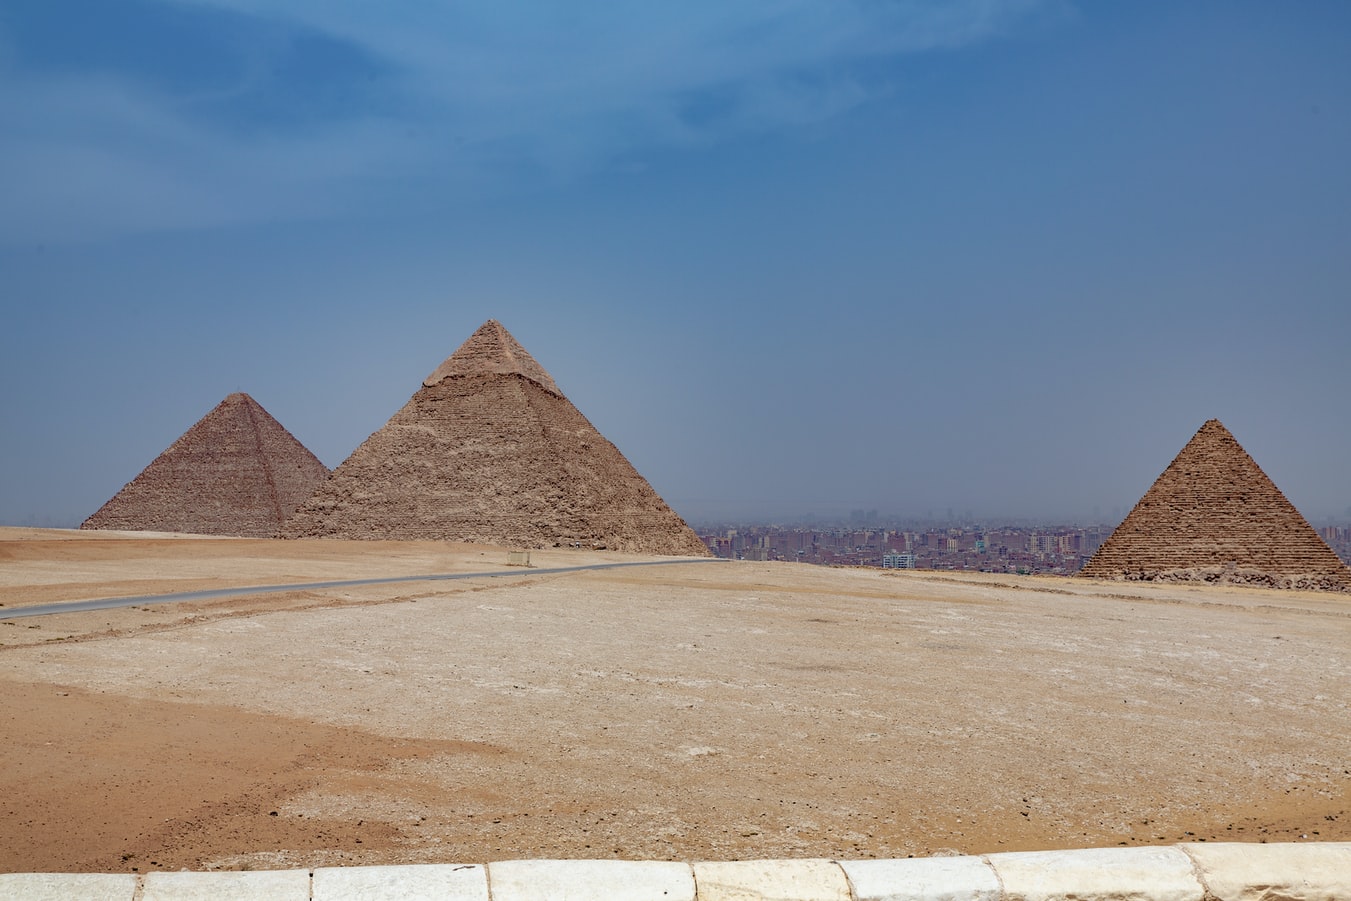 10 Things You Need to Observe When You Visit Egypt